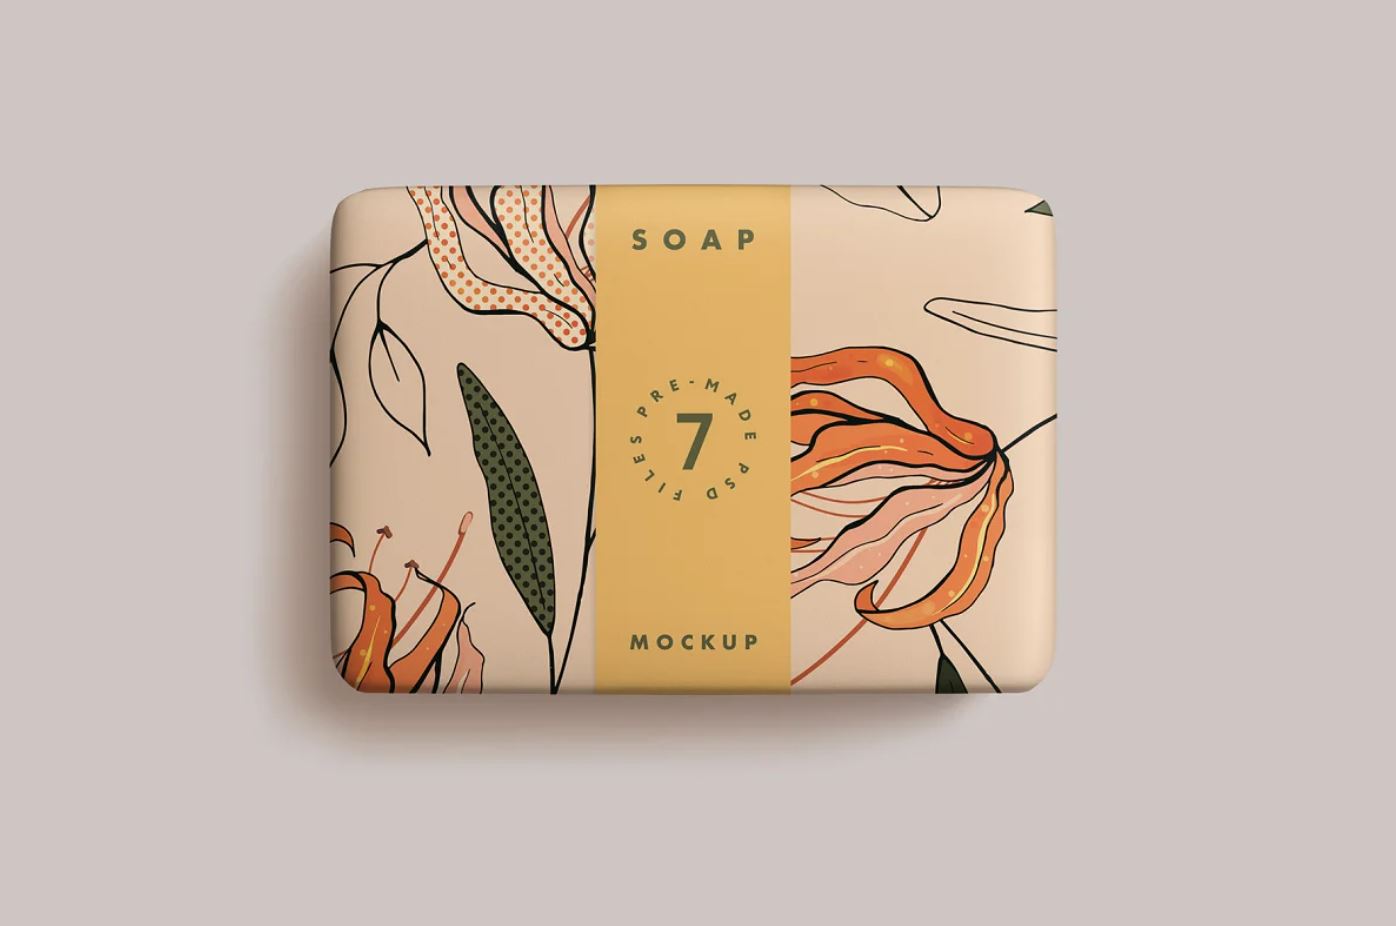 Realistic Product Packaging Mockup PSD Download for soap branding